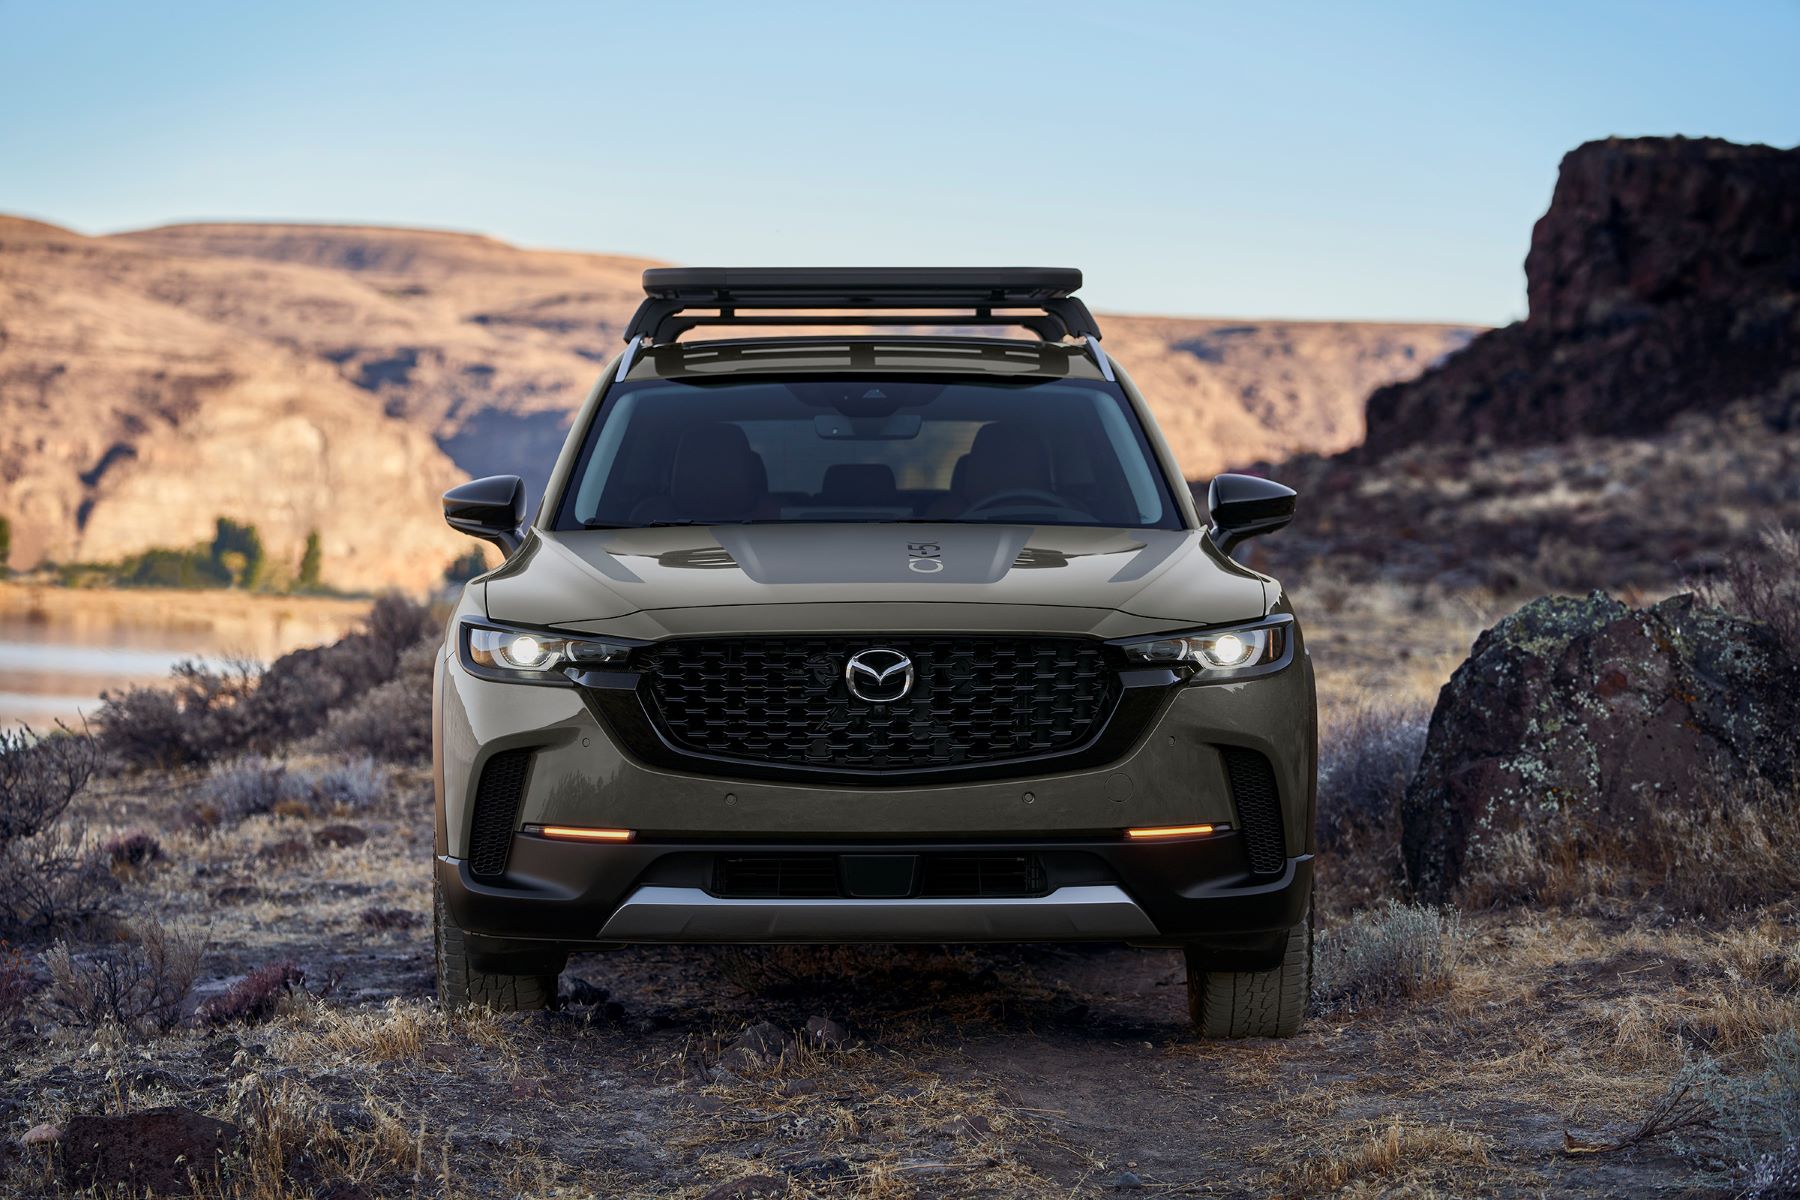 A 2023 Mazda CX-50 compact crossover SUV with a roof rack parked on off-road terrain